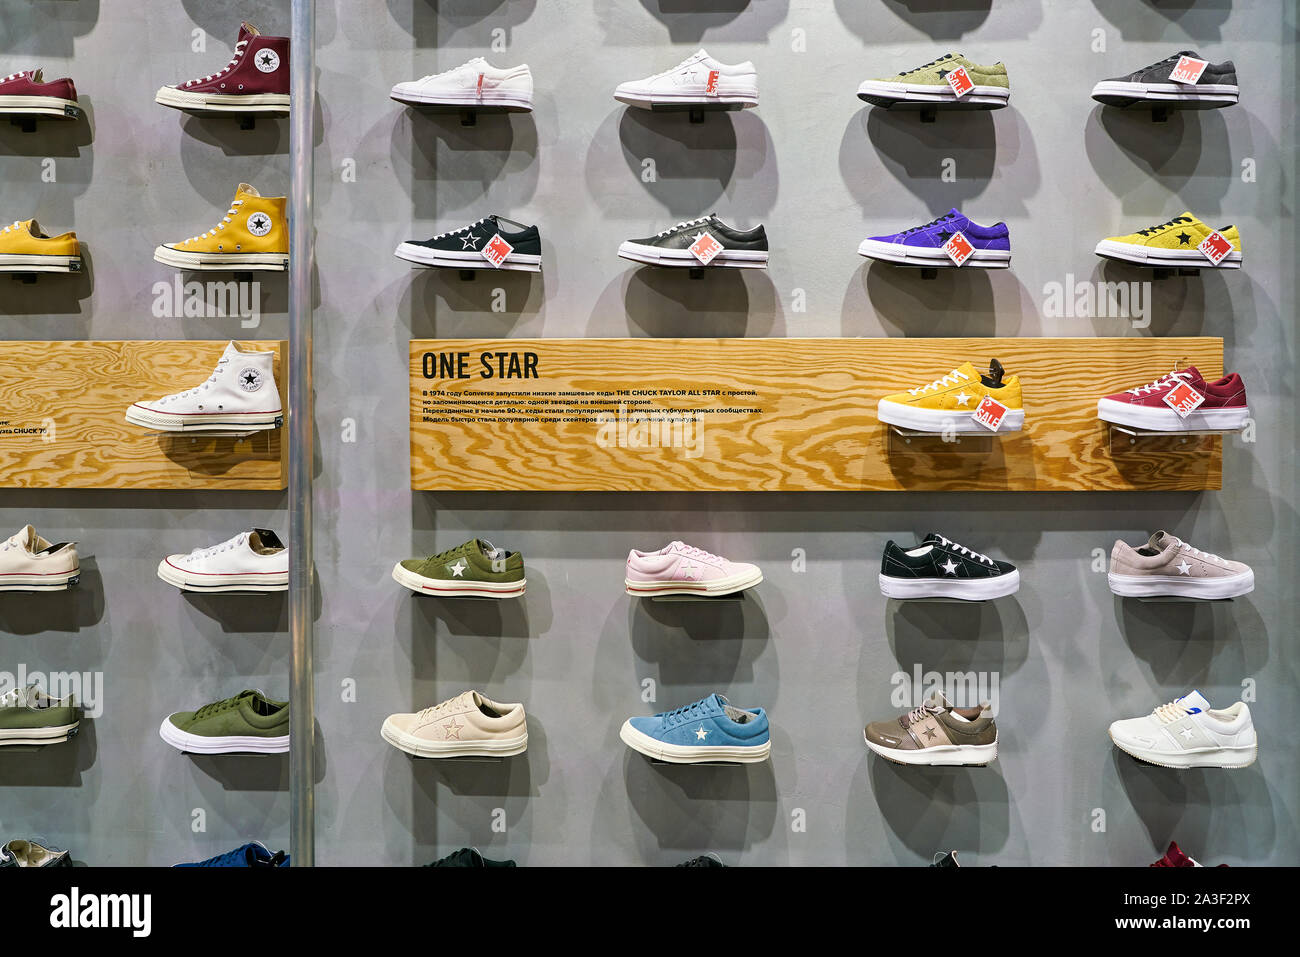 Page 2 - Converse Store High Resolution Stock Photography and Images - Alamy